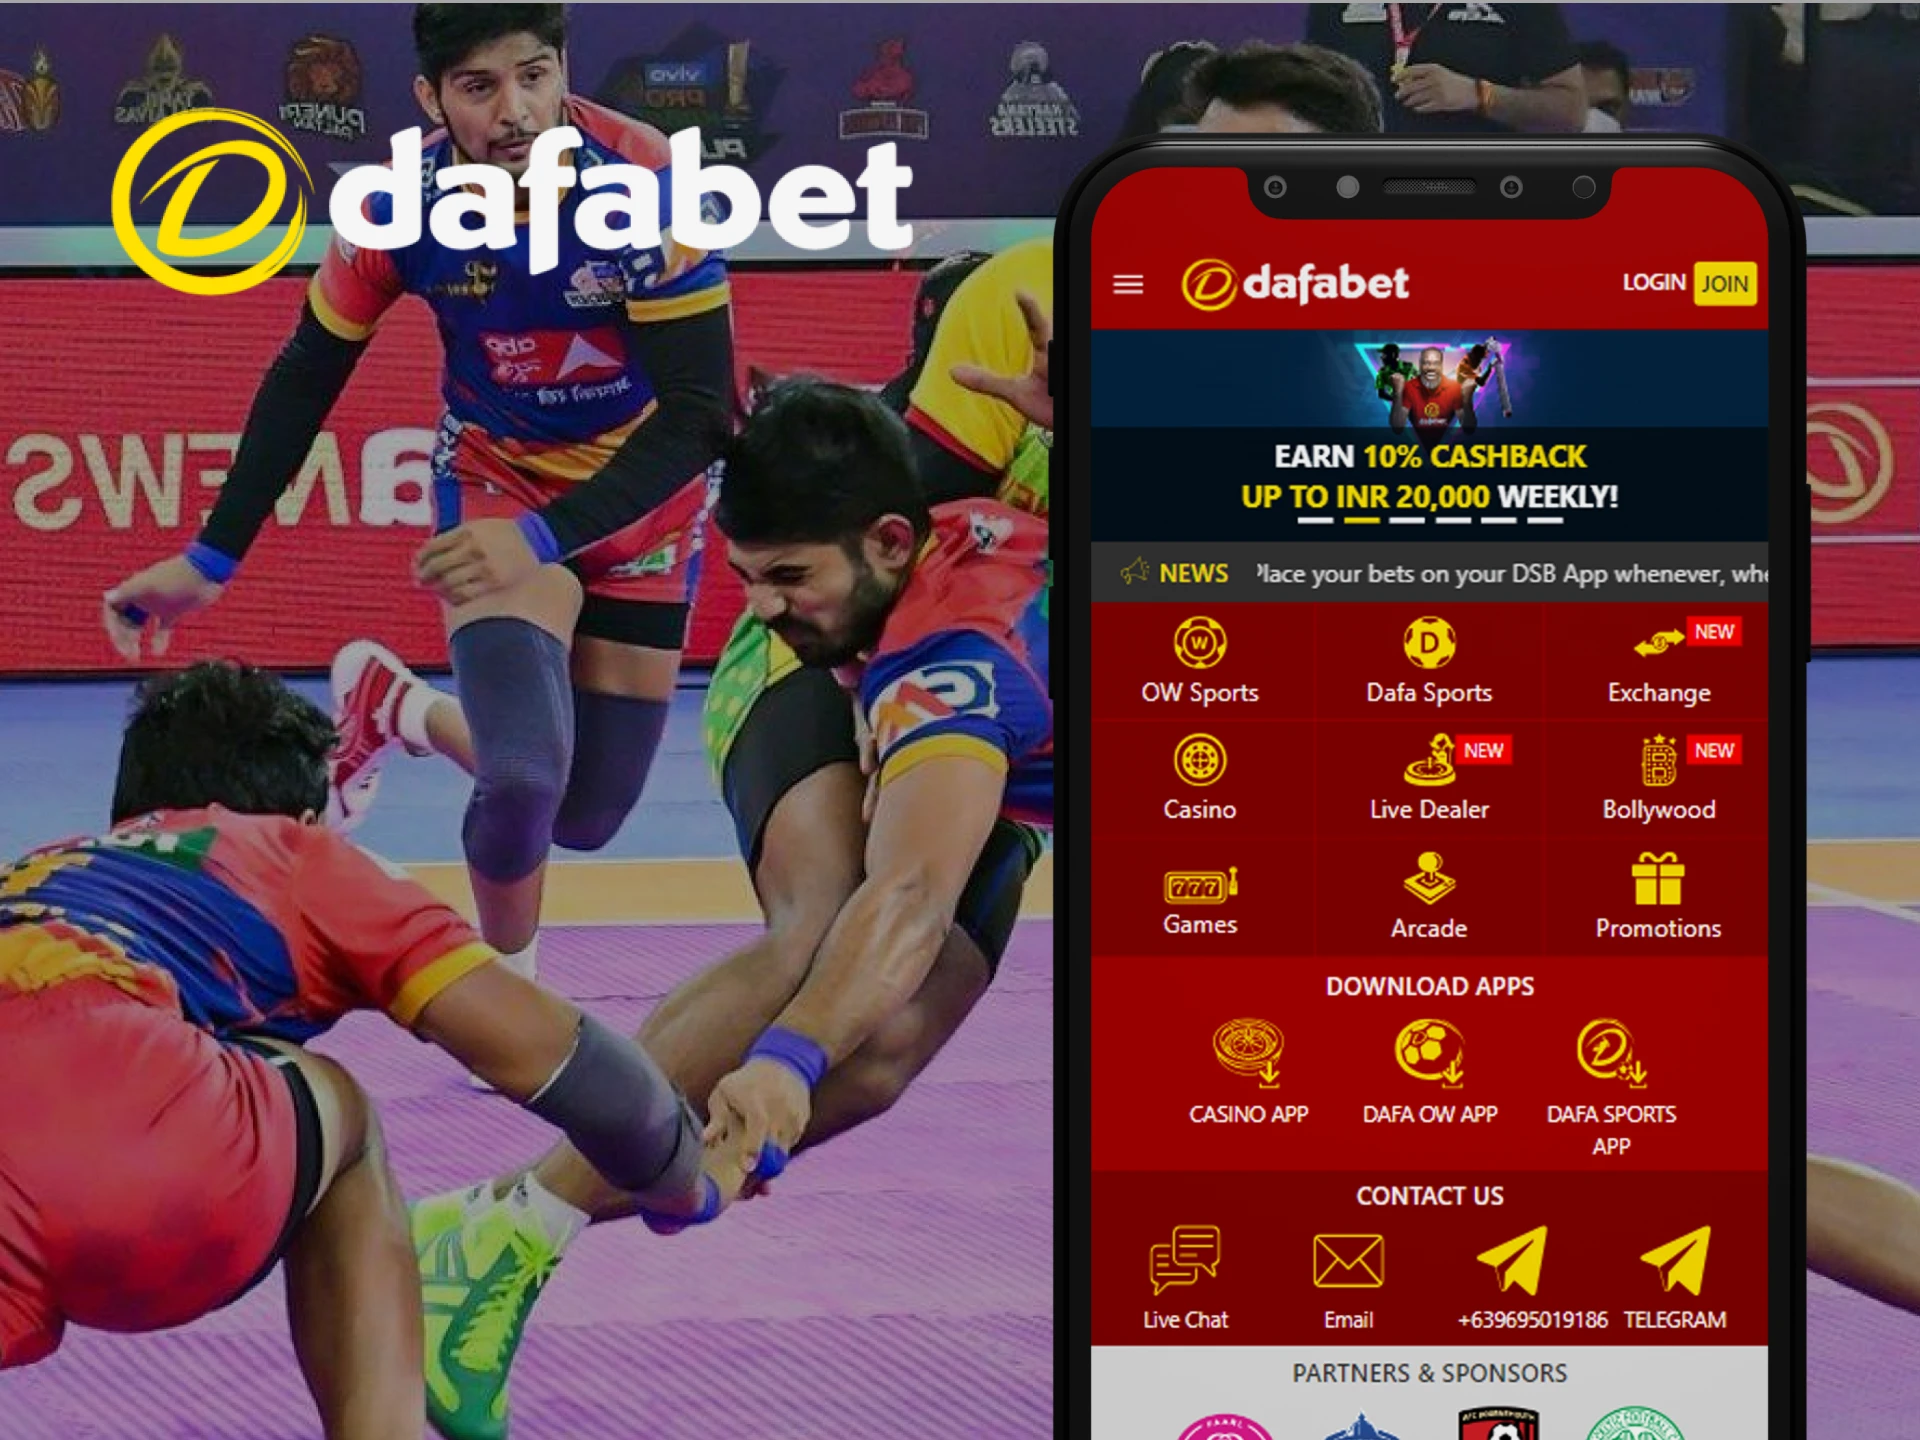 Try betting on sports using the Dafabet app.